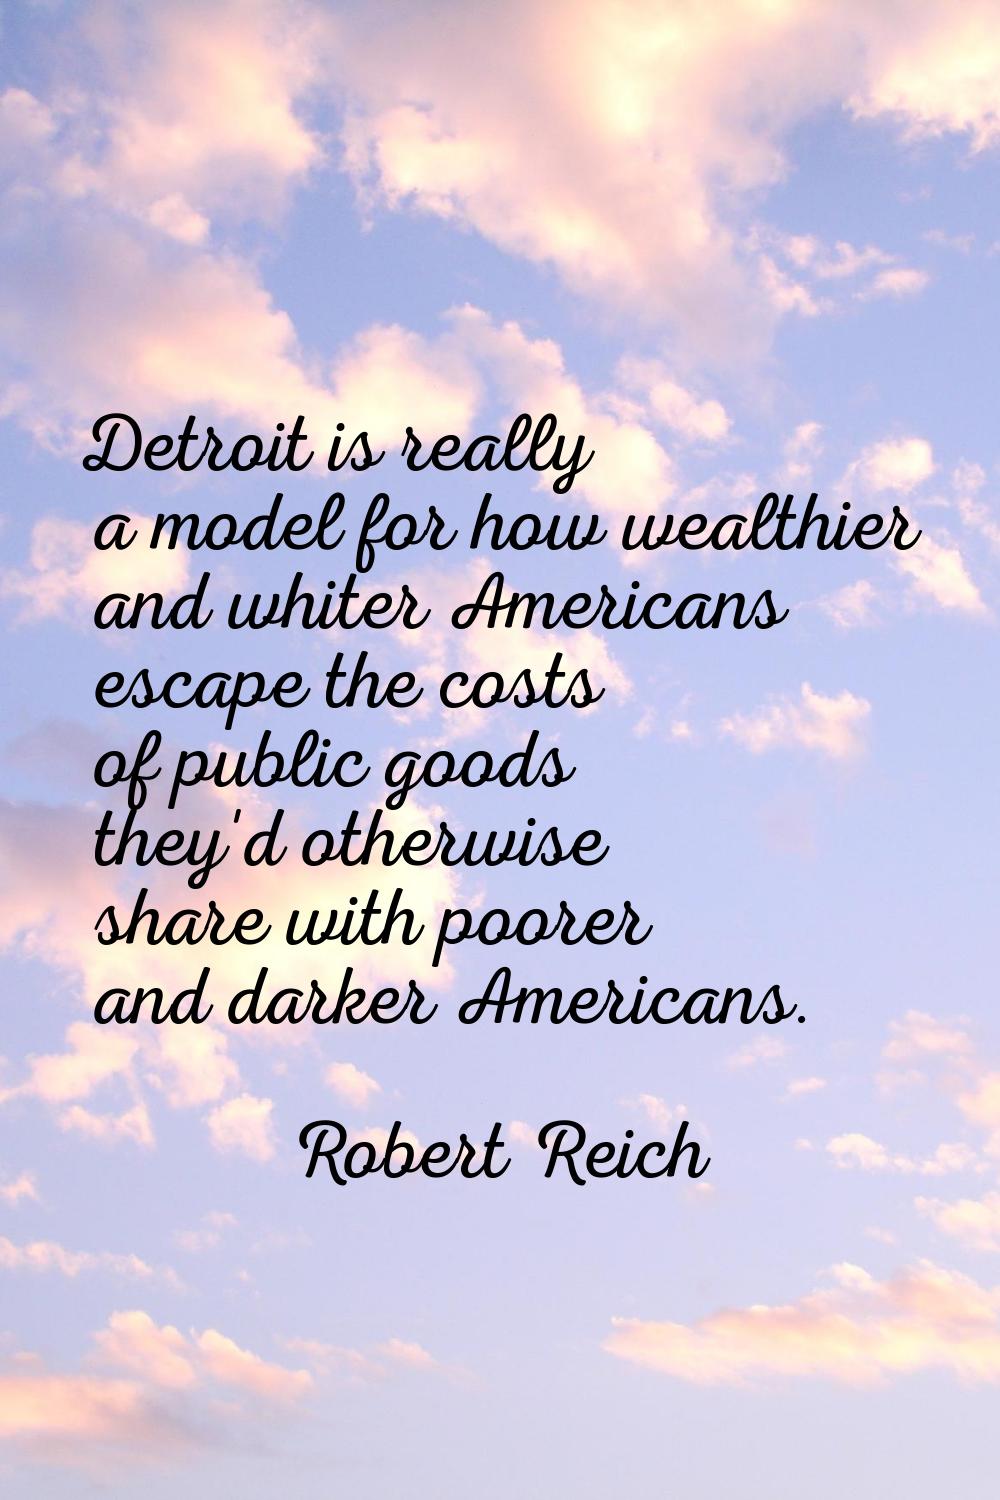 Detroit is really a model for how wealthier and whiter Americans escape the costs of public goods t